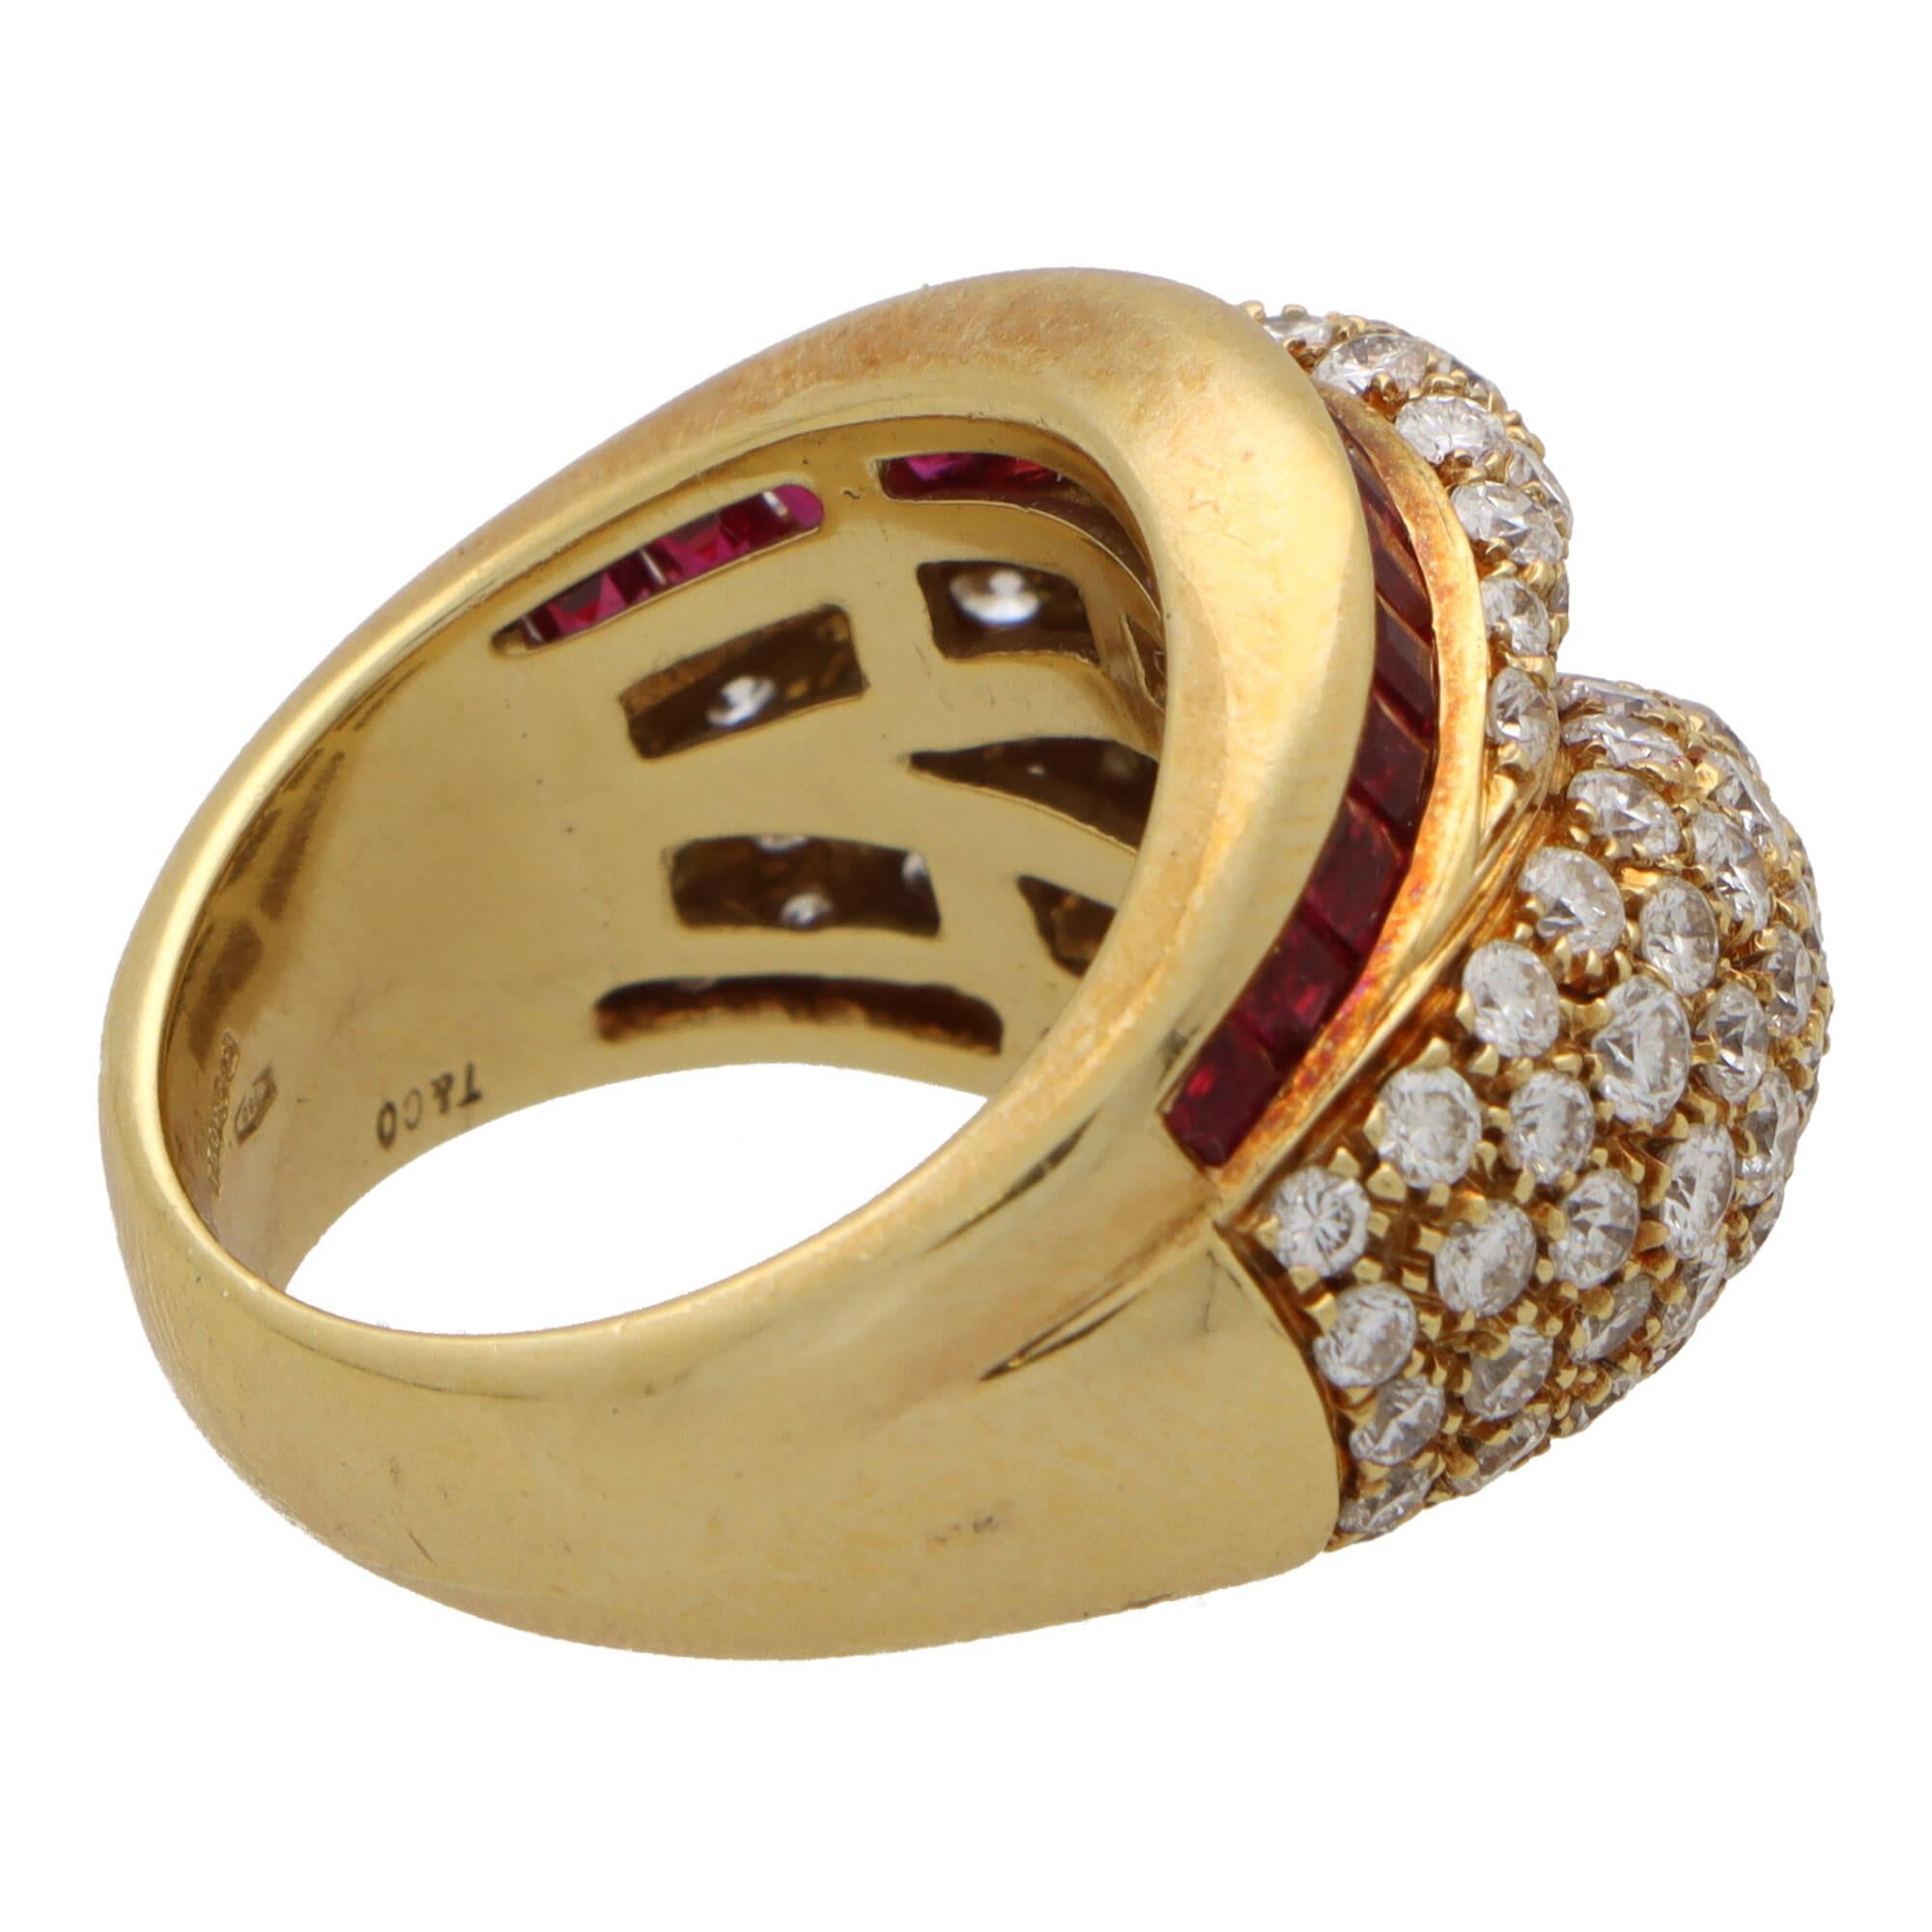 Women's or Men's Vintage 1980's Tiffany & Co. Diamond and Ruby Bombé Ring in 18k Yellow Gold For Sale